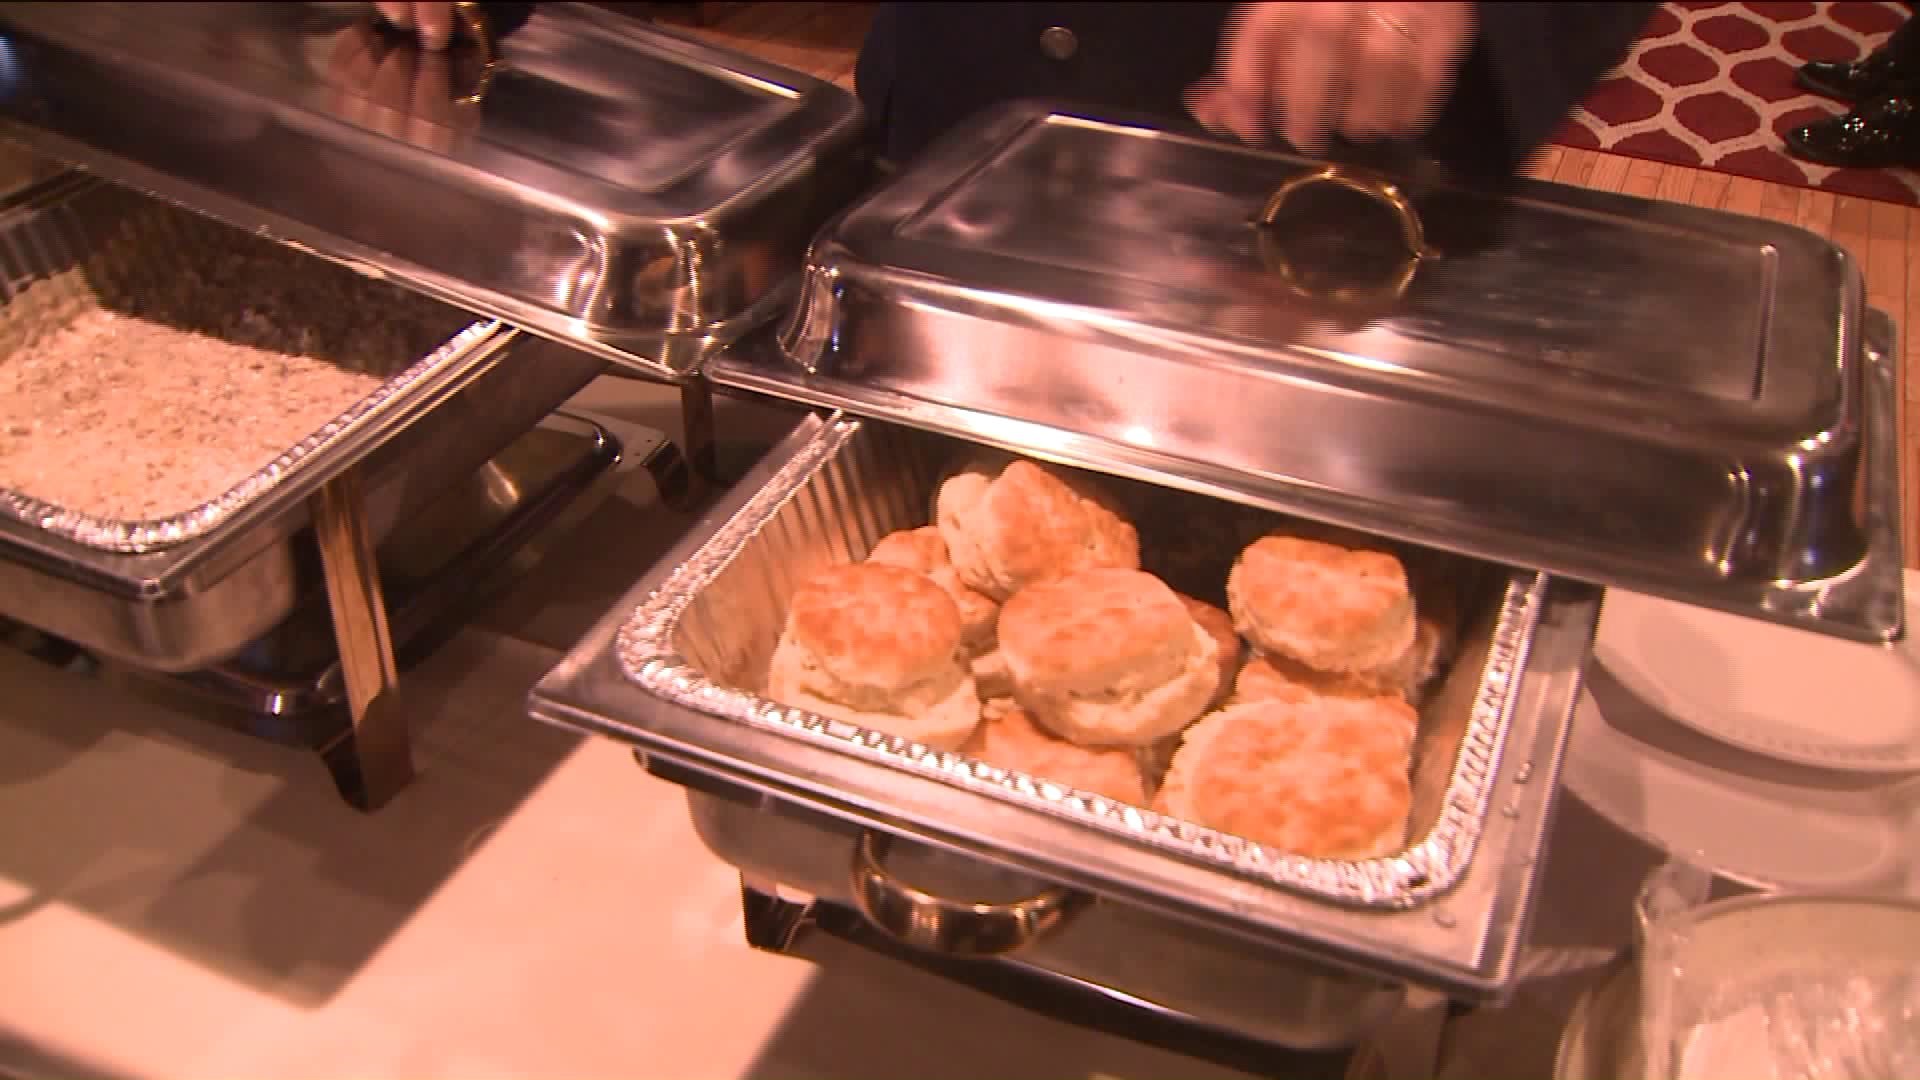 Free traditional military breakfast served up in New Haven for Veterans